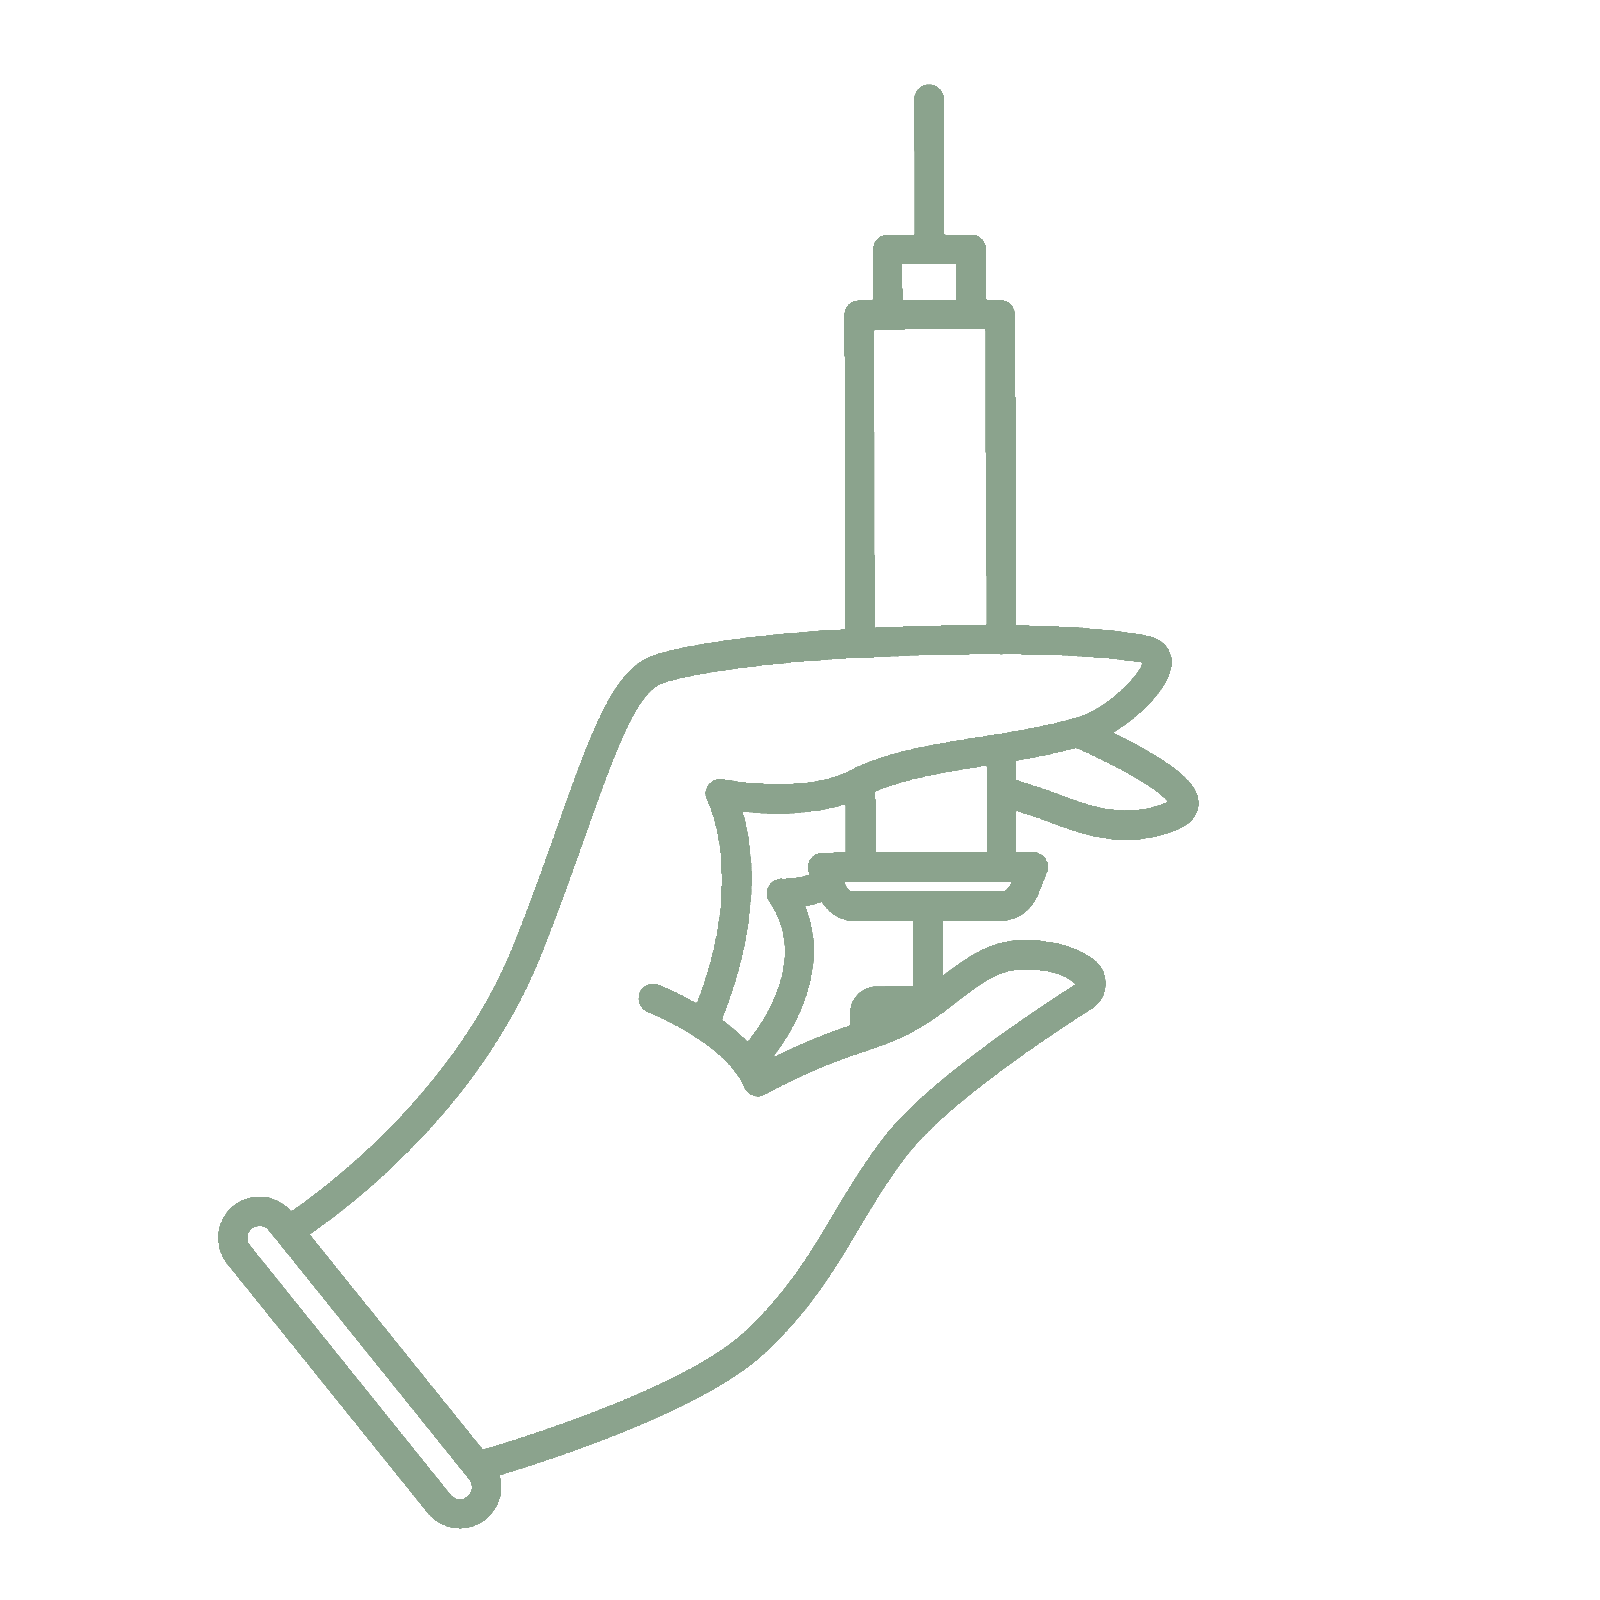 Injection and Hand Icon